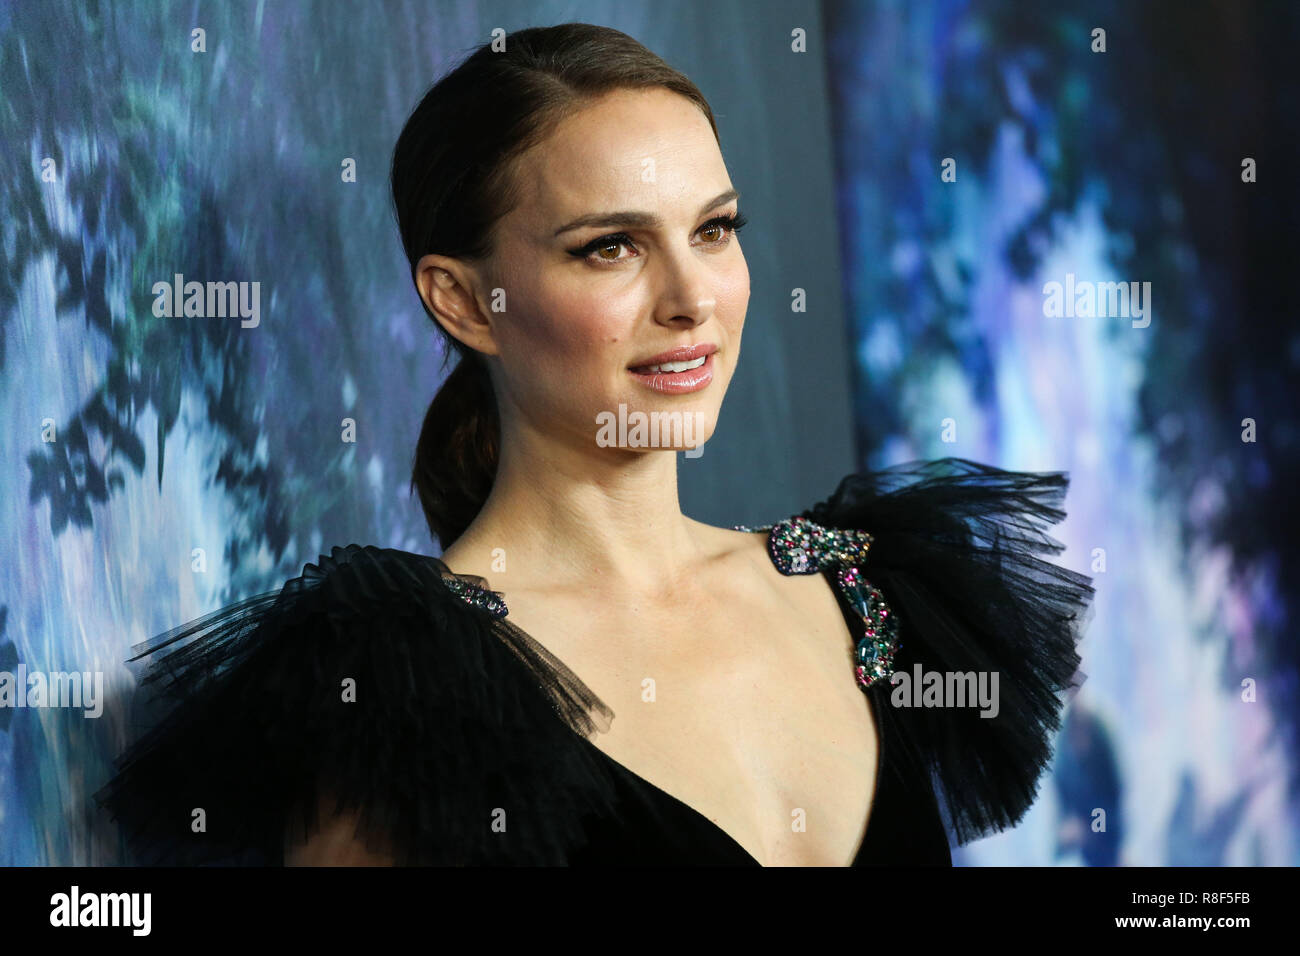 WESTWOOD, LOS ANGELES, CA, USA - FEBRUARY 13: Natalie Portman at the Los Angeles Premiere Of Paramount Pictures' 'Annihilation' held at the Regency Village Theatre on February 13, 2018 in Westwood, Los Angeles, California, United States. (Photo by Xavier Collin/Image Press Agency) Stock Photo